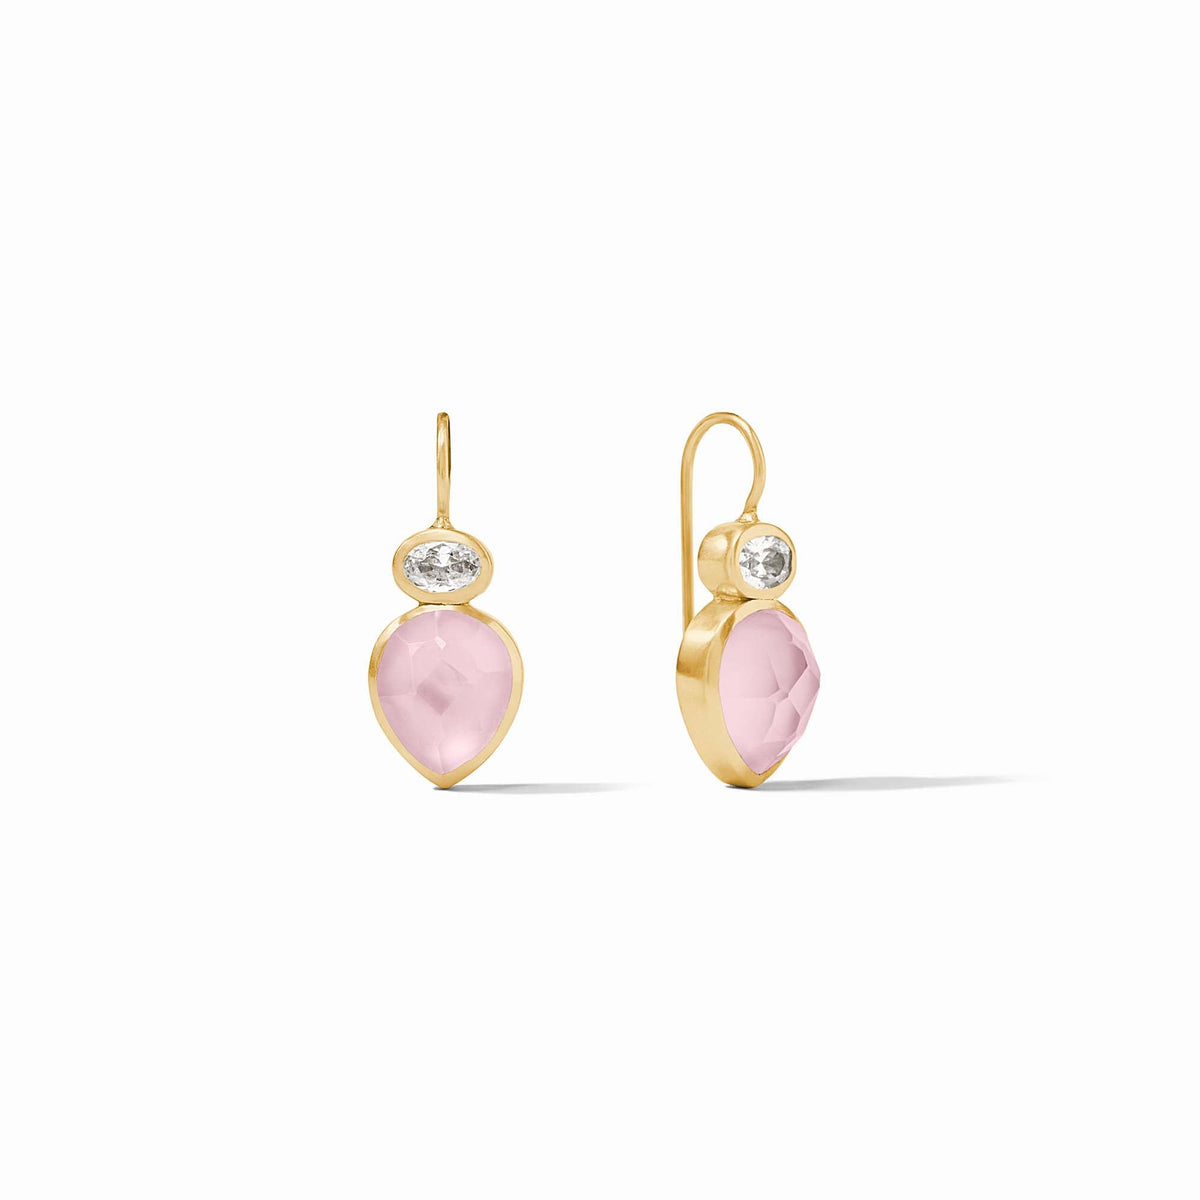 Julie Vos - Clementine Earring, Iridescent Rose